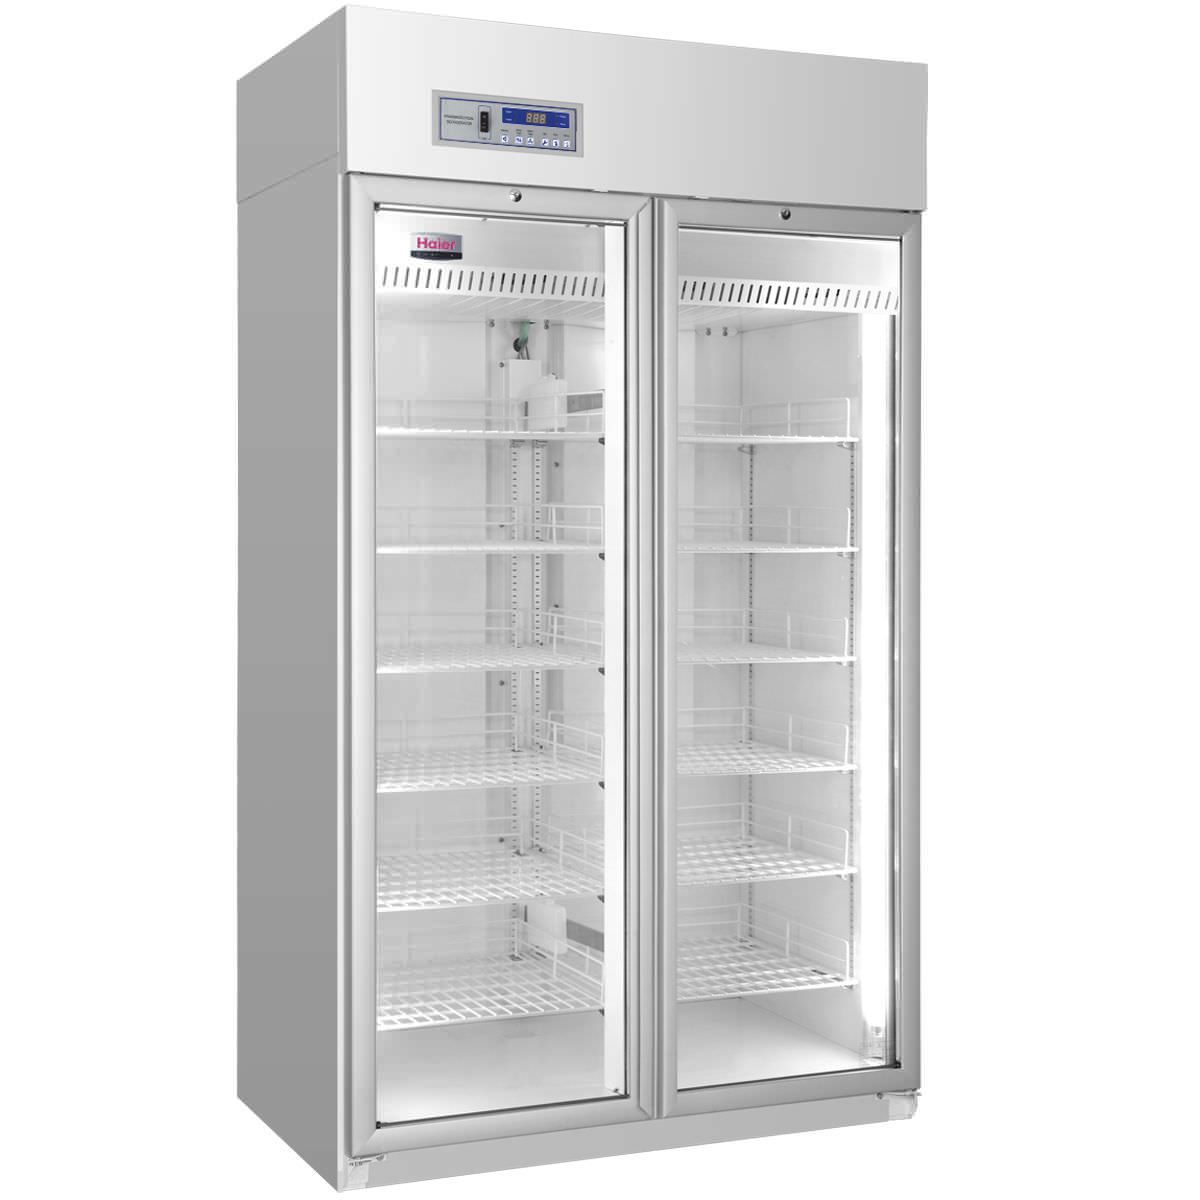 Pharmacy refrigerator / cabinet / 2-door 2 °C ... 8 °C, 890 L | HYC-940 Haier Medical and Laboratory Products